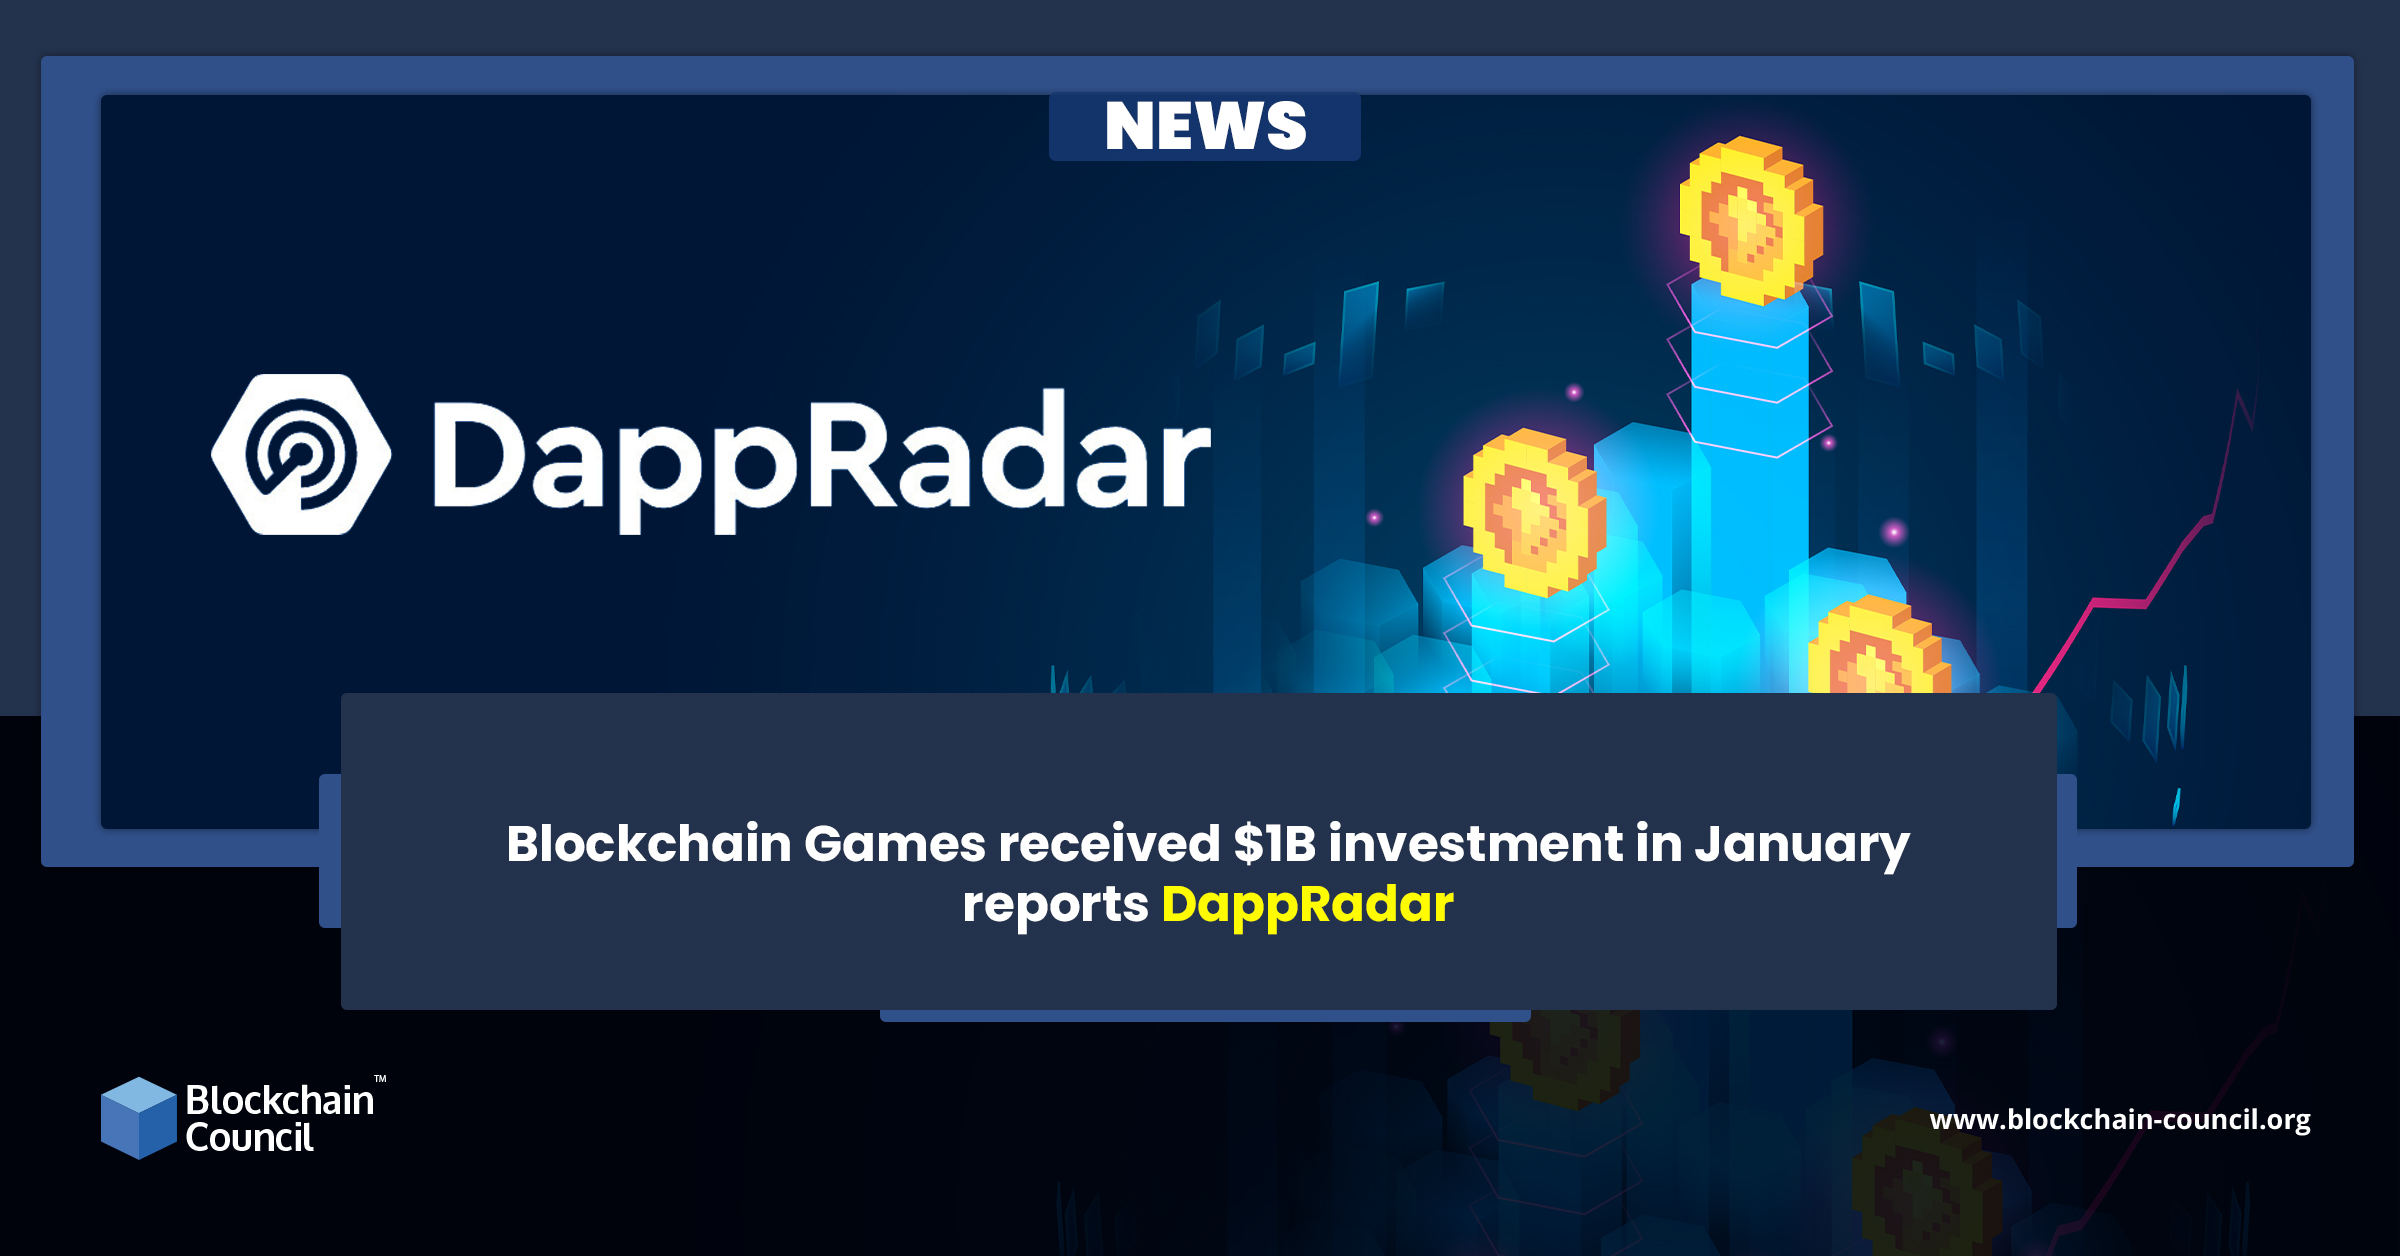 Blockchain Games received $1B investment in January reports DappRadar